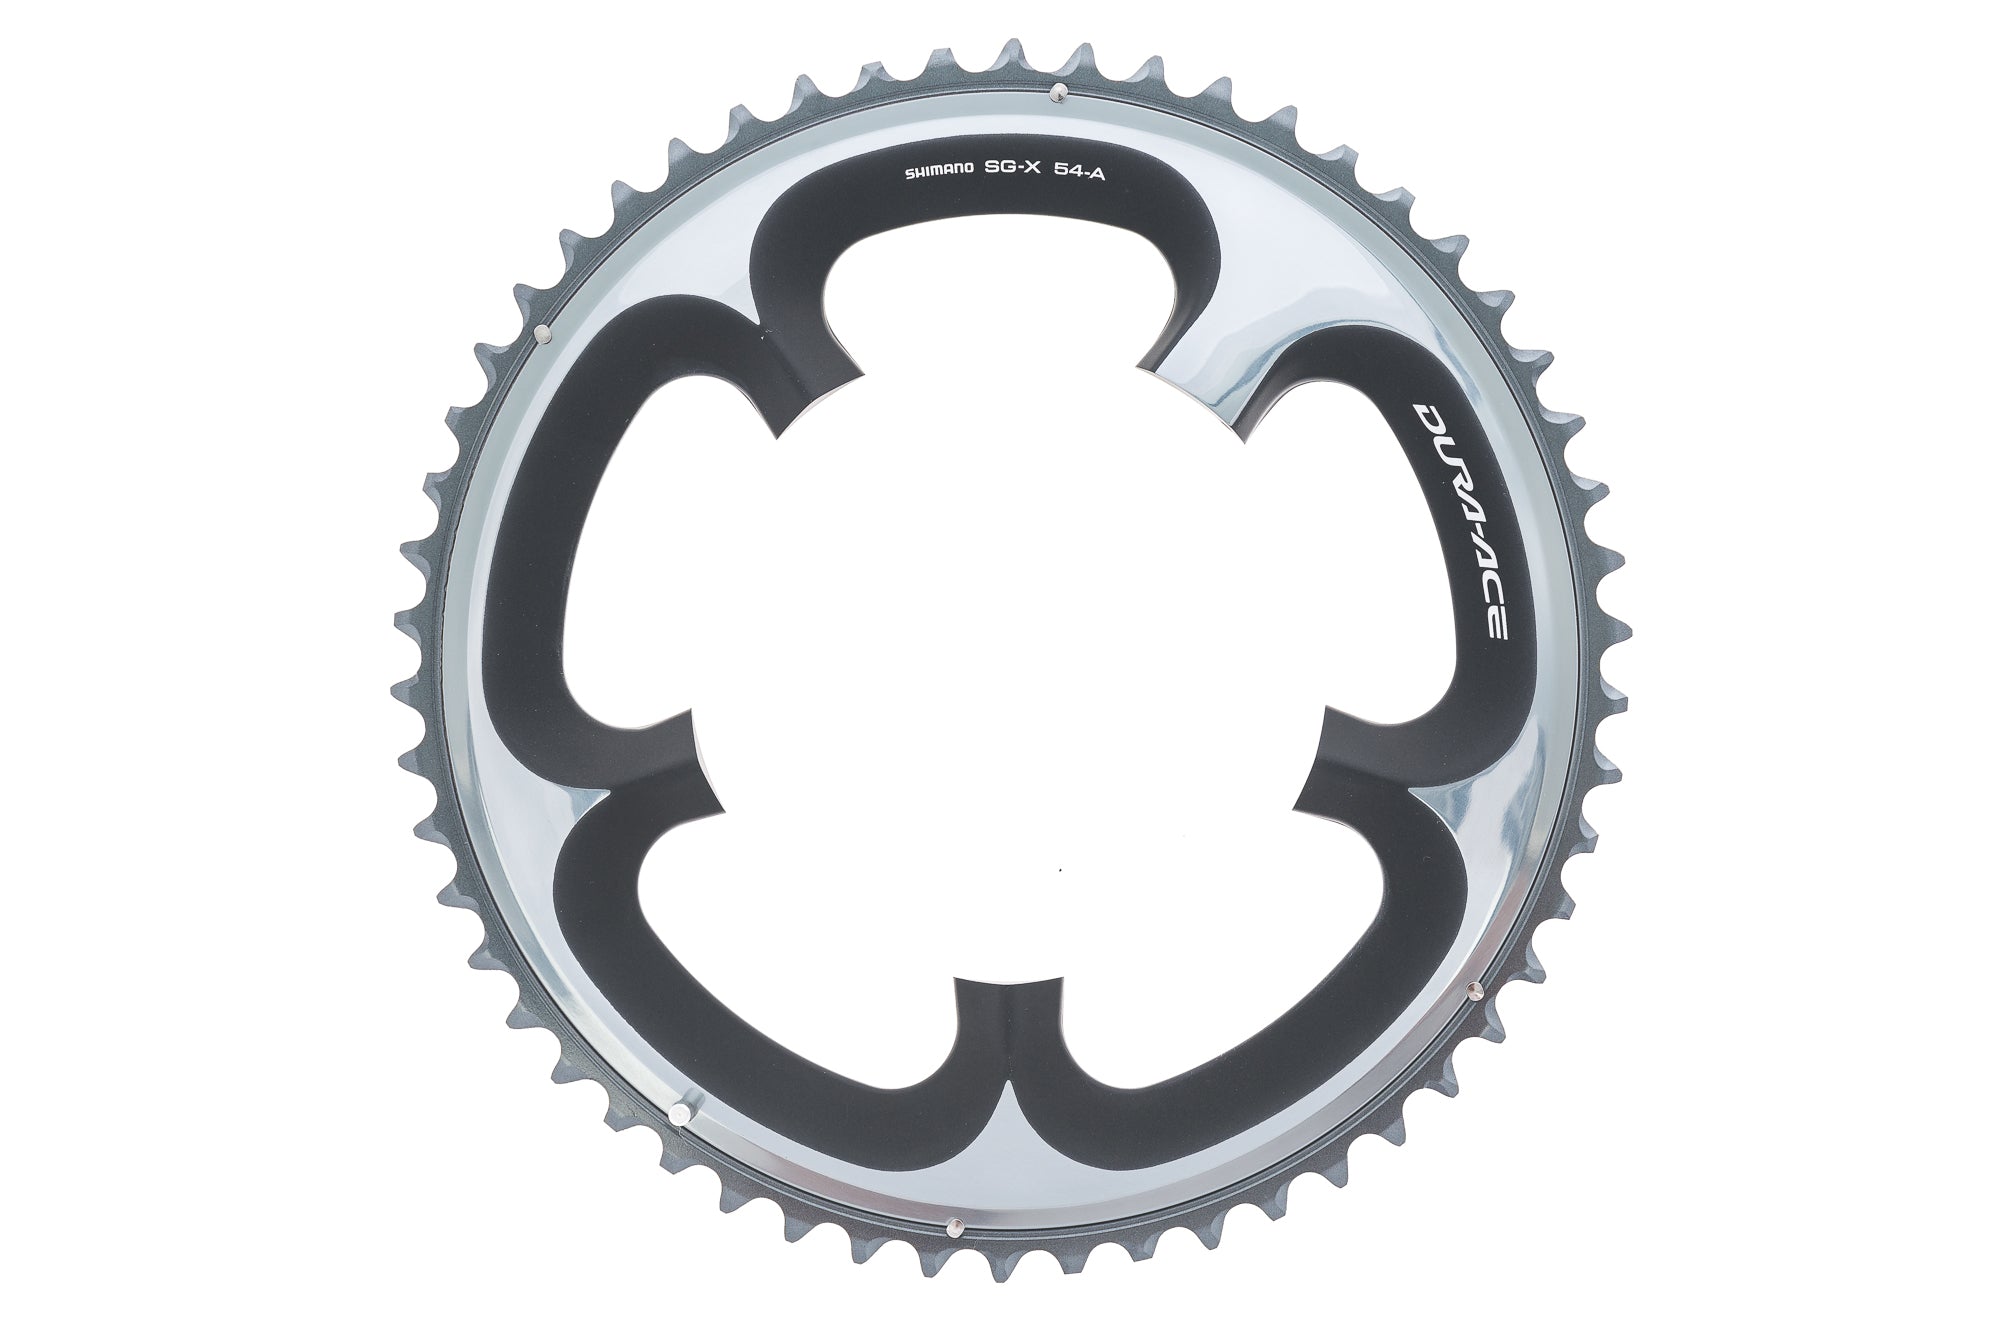 Shimano Dura-Ace FC-7900 Chainring 10 Speed 54T 130mm drive side